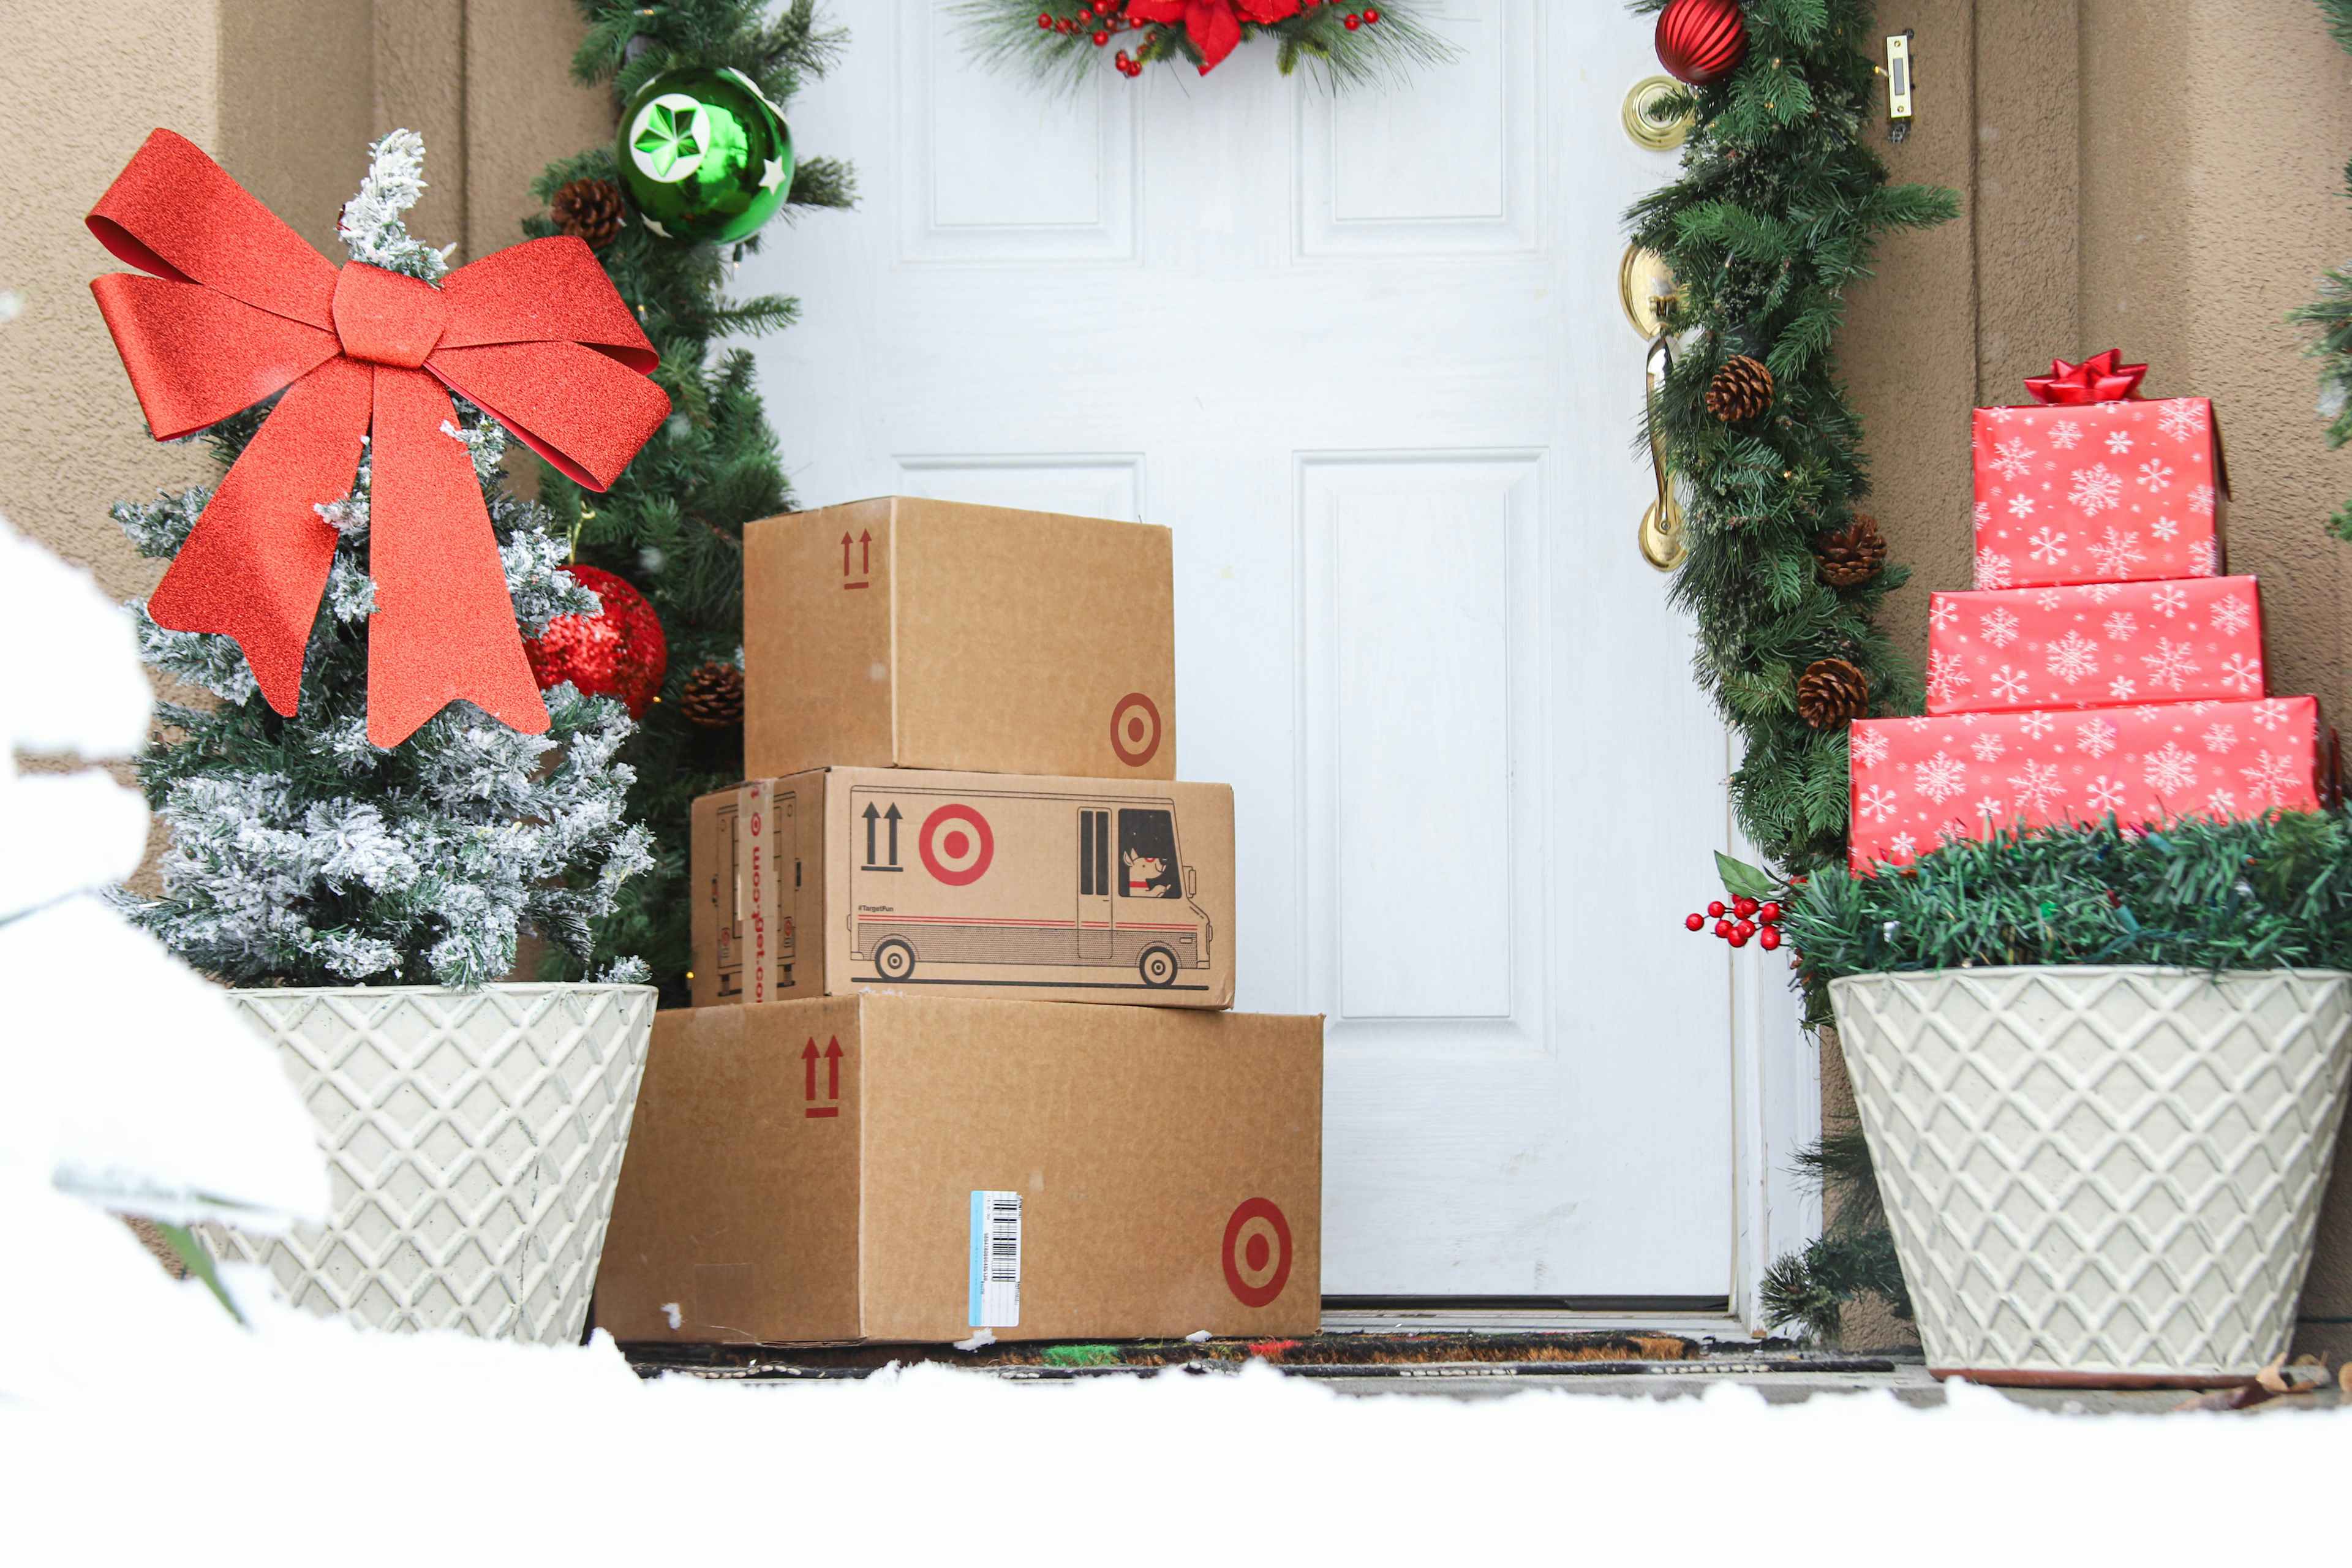 a stack of target boxes on winter doorstep